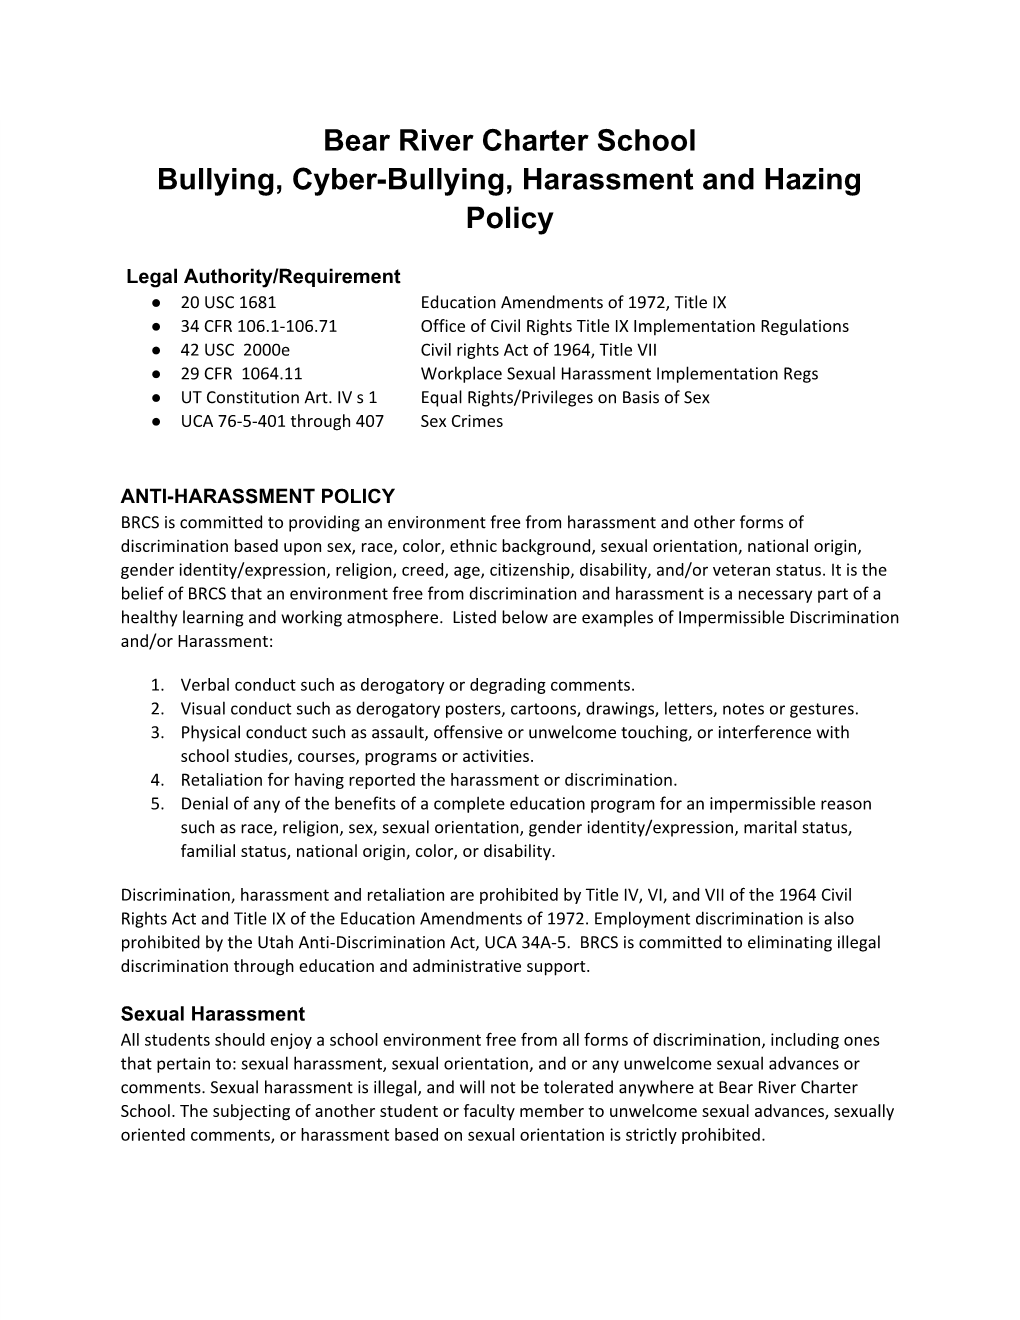 Bear River Charter School Bullying, Cyber-Bullying, Harassment and Hazing Policy